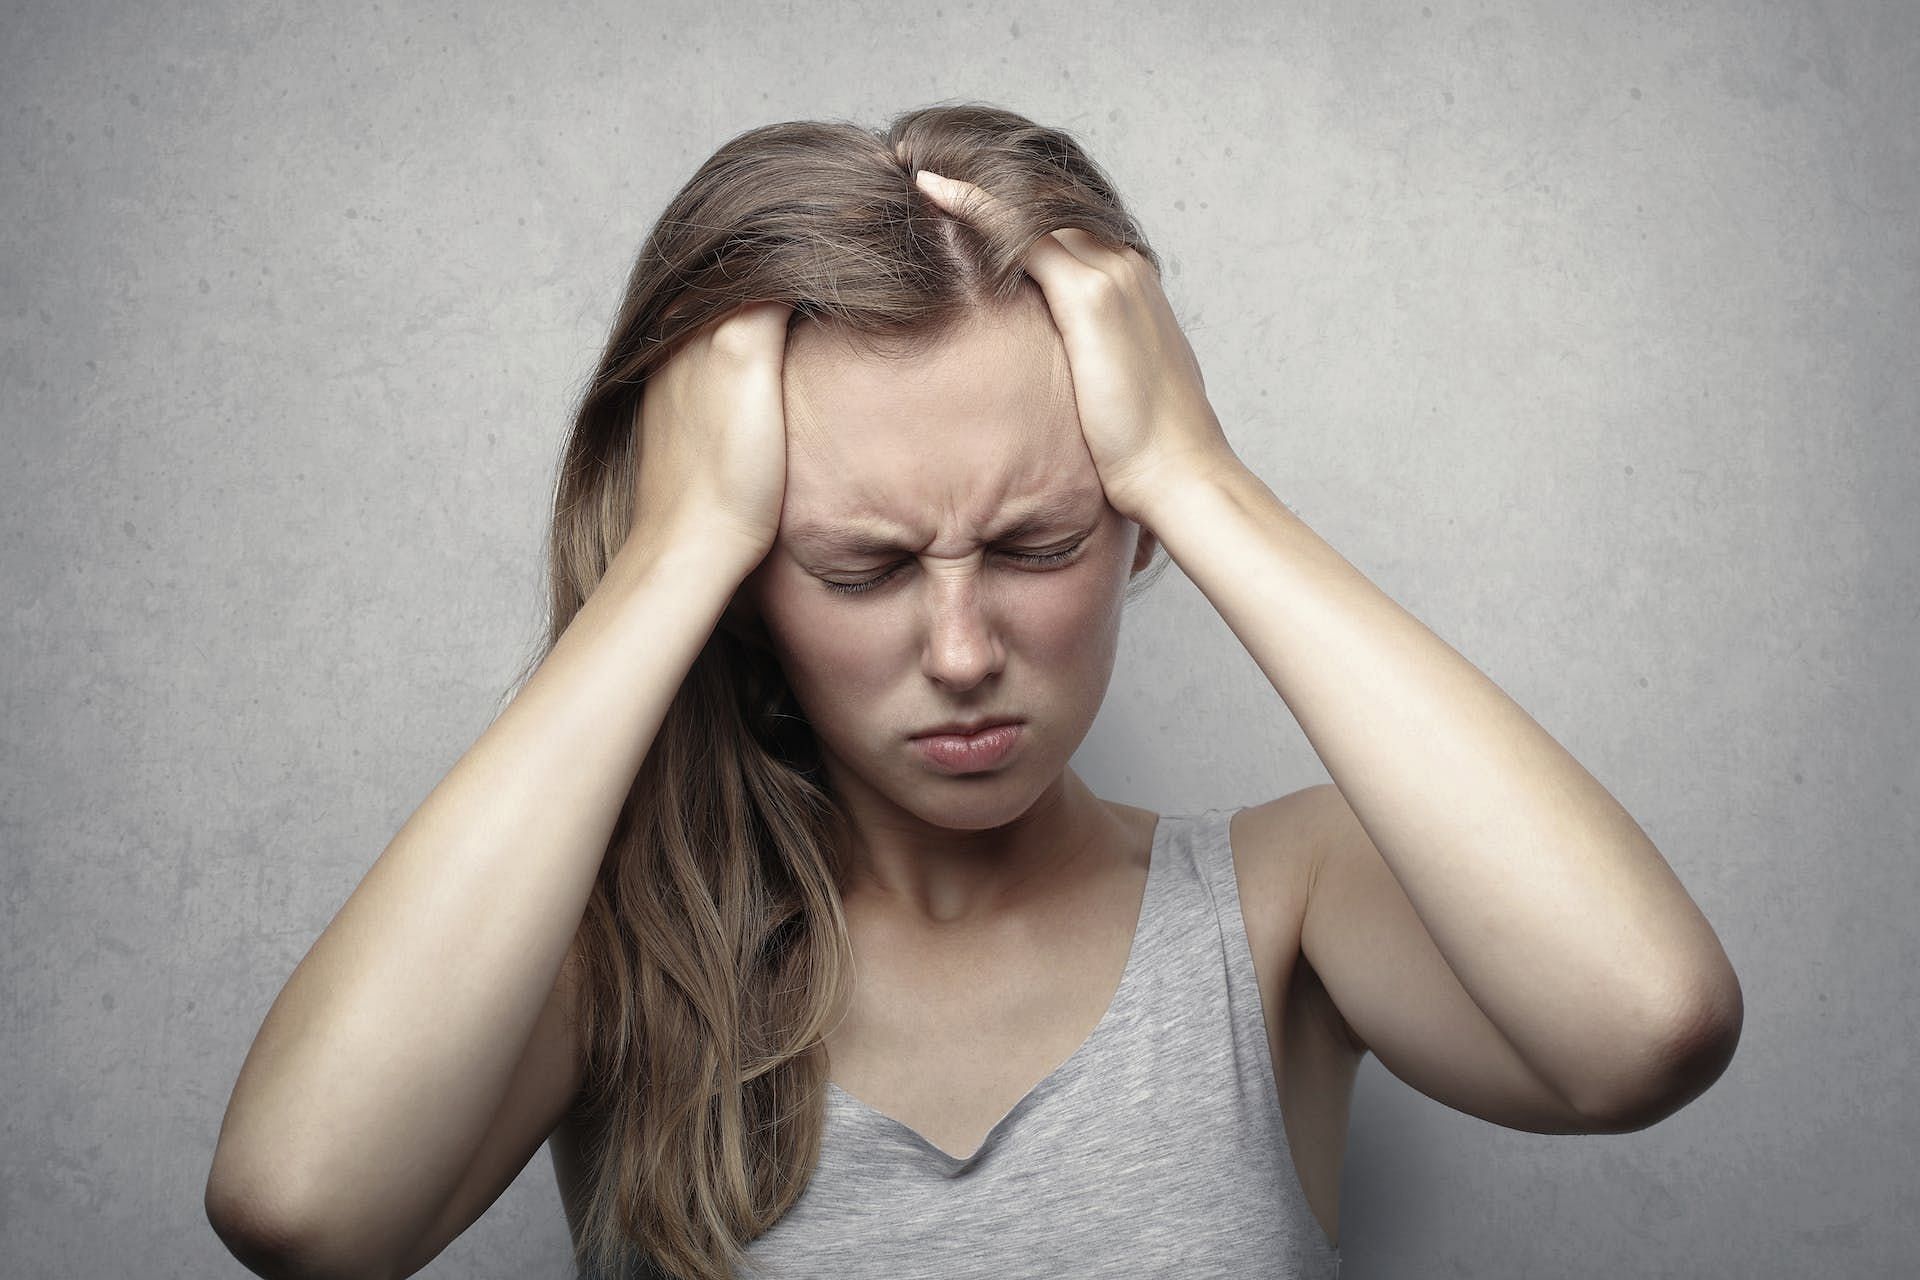 Headaches can also happen as a result of low blood sugar. (Image via Pexels/Andrea Piacquadio)